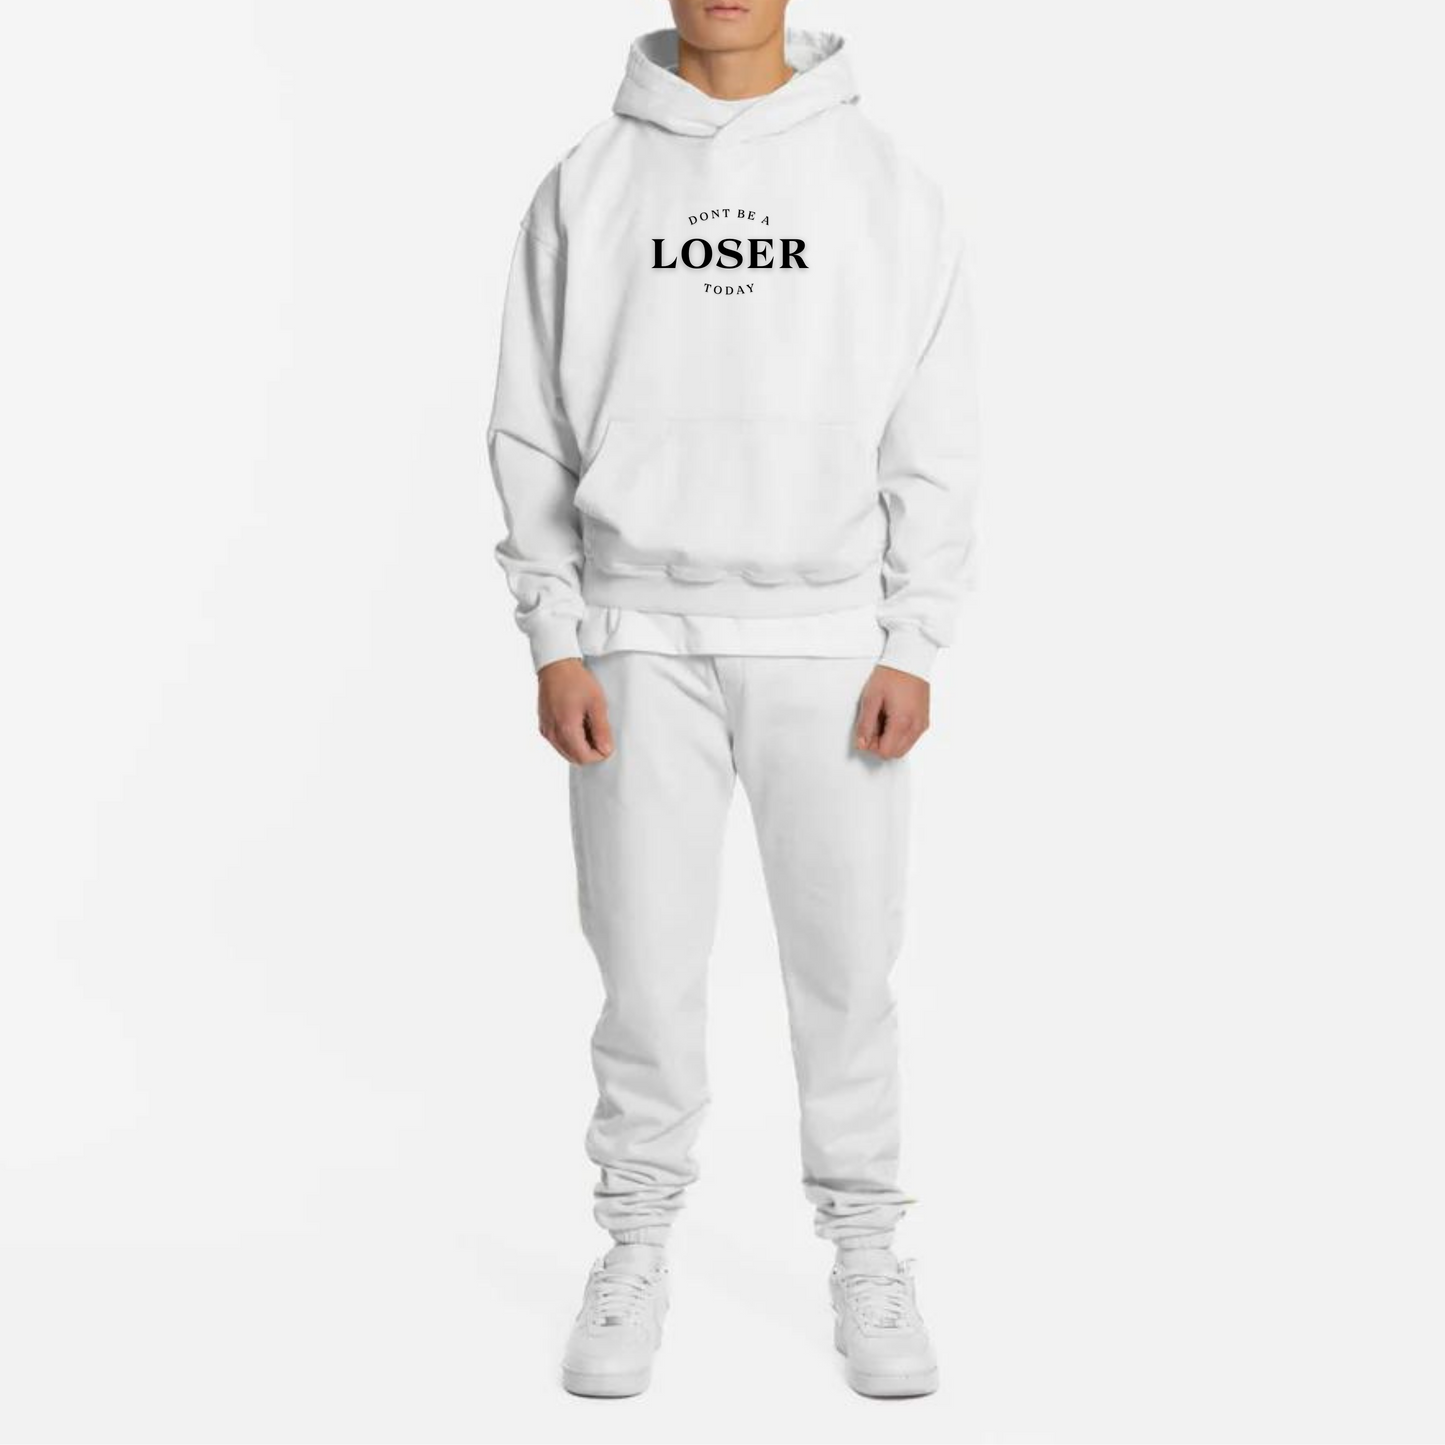 DON'T BE A LOSER - HOODIE